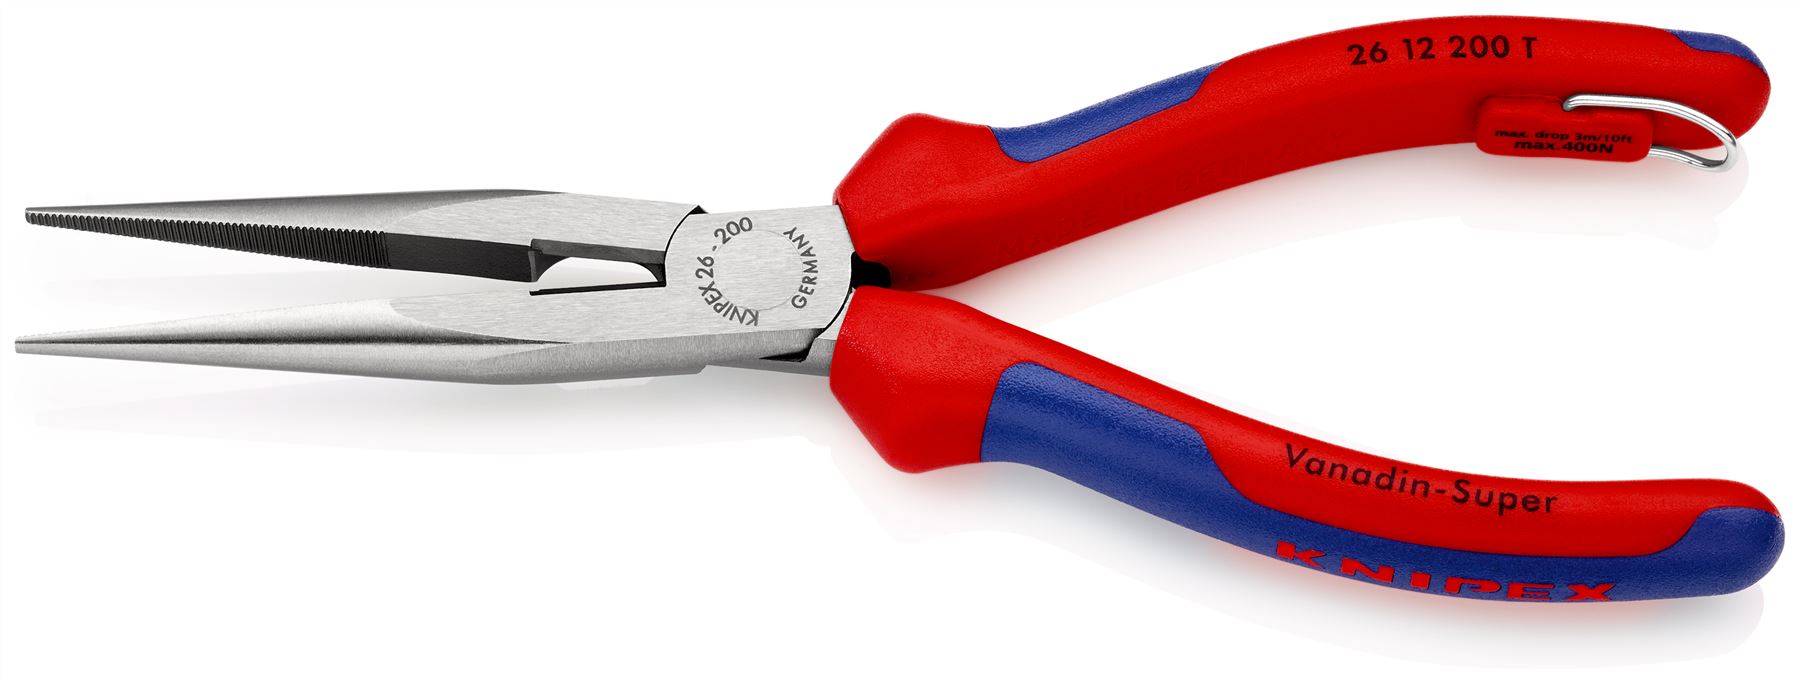 Knipex Snipe Nose Side Cutting Pliers 200mm Multi Component Grips with Tether Point 26 12 200 T